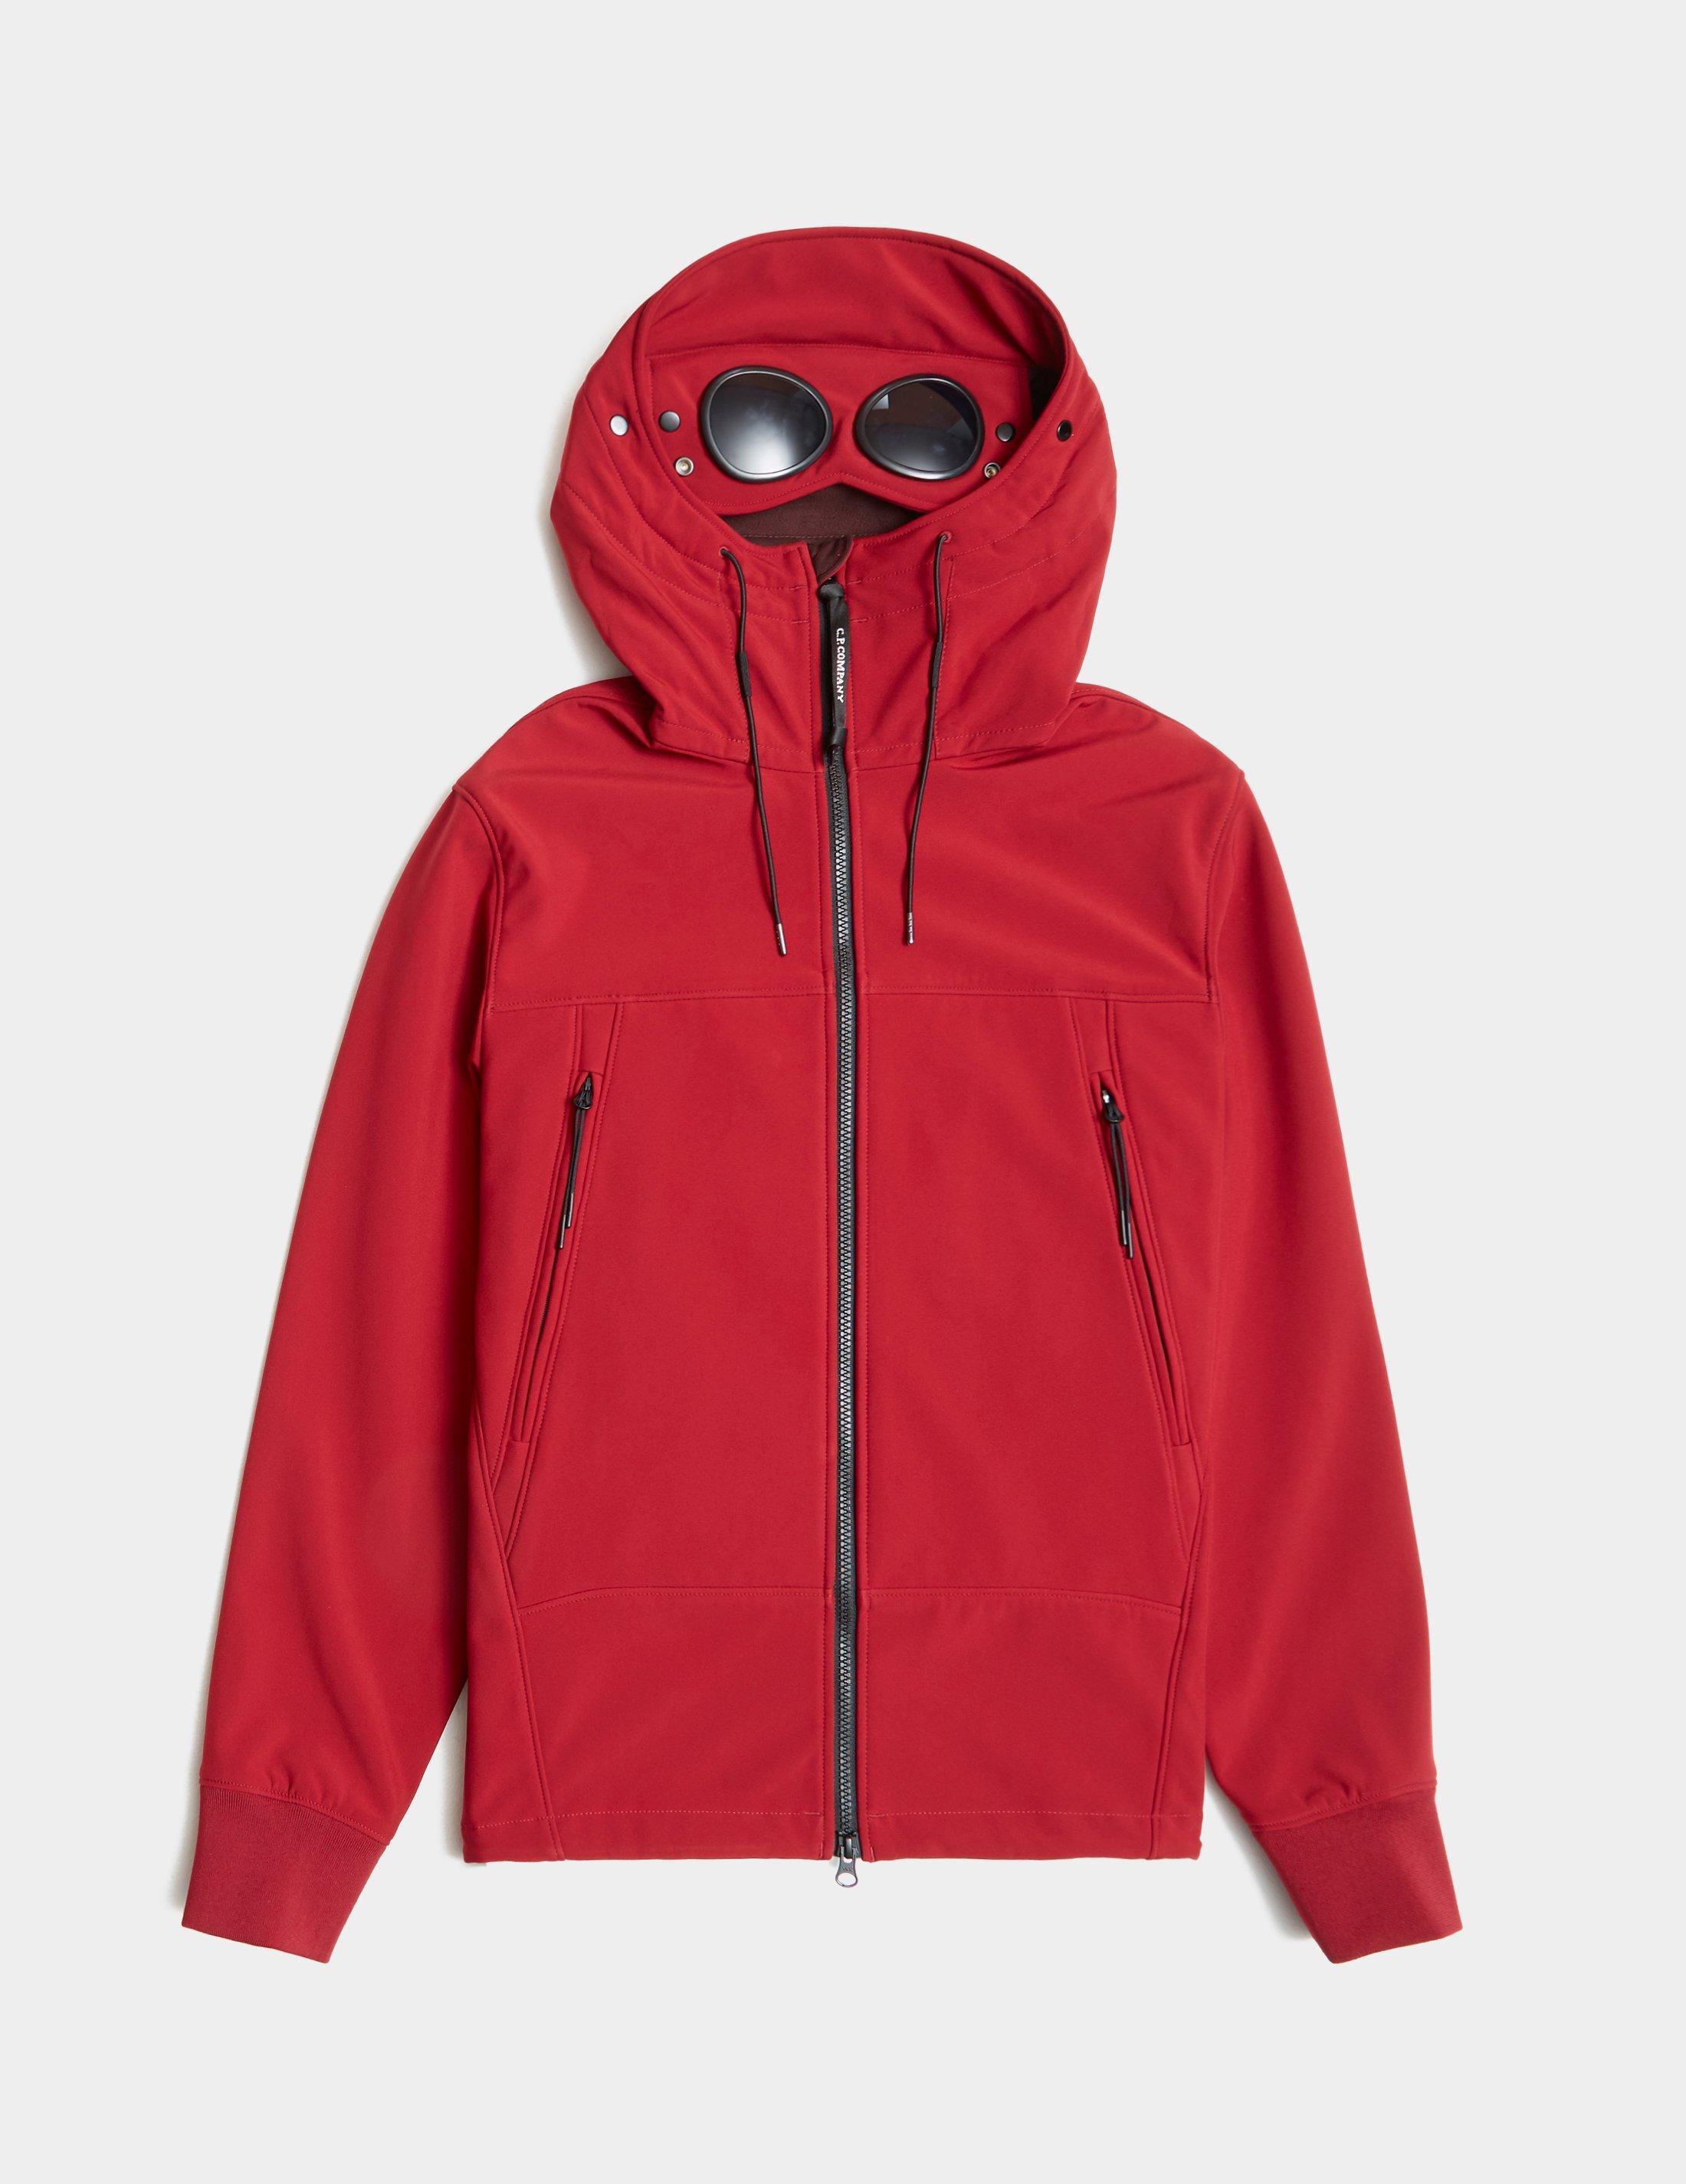 Cp Company Soft Shell Jacket Outlets Shop, 54% OFF | thisweekinswingnyc.com